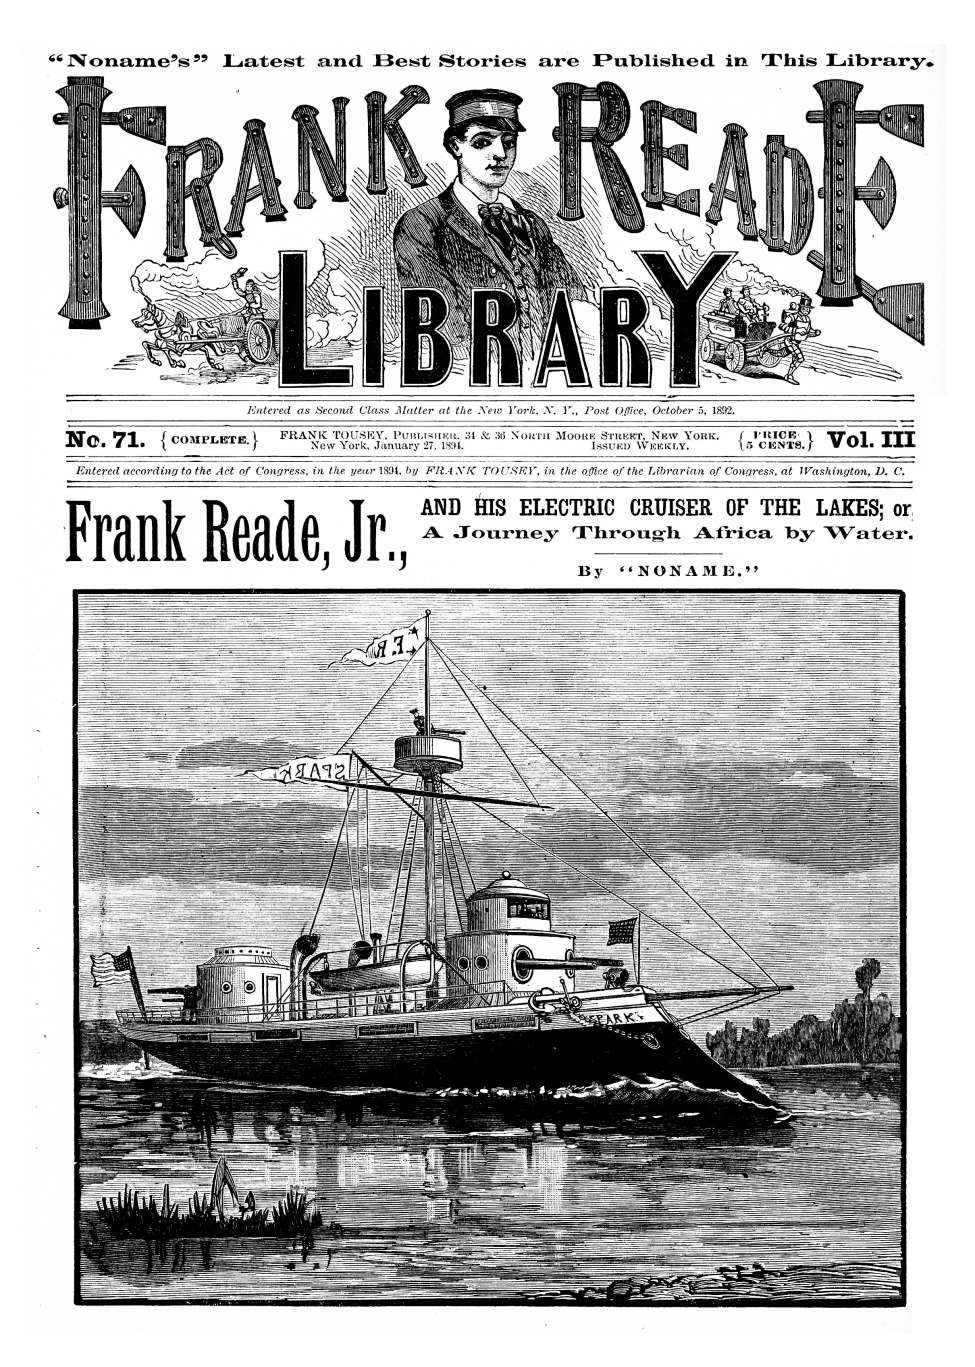 Book Cover For v03 71 - Frank Reade, Jr., and His Electric Cruiser of the Lakes